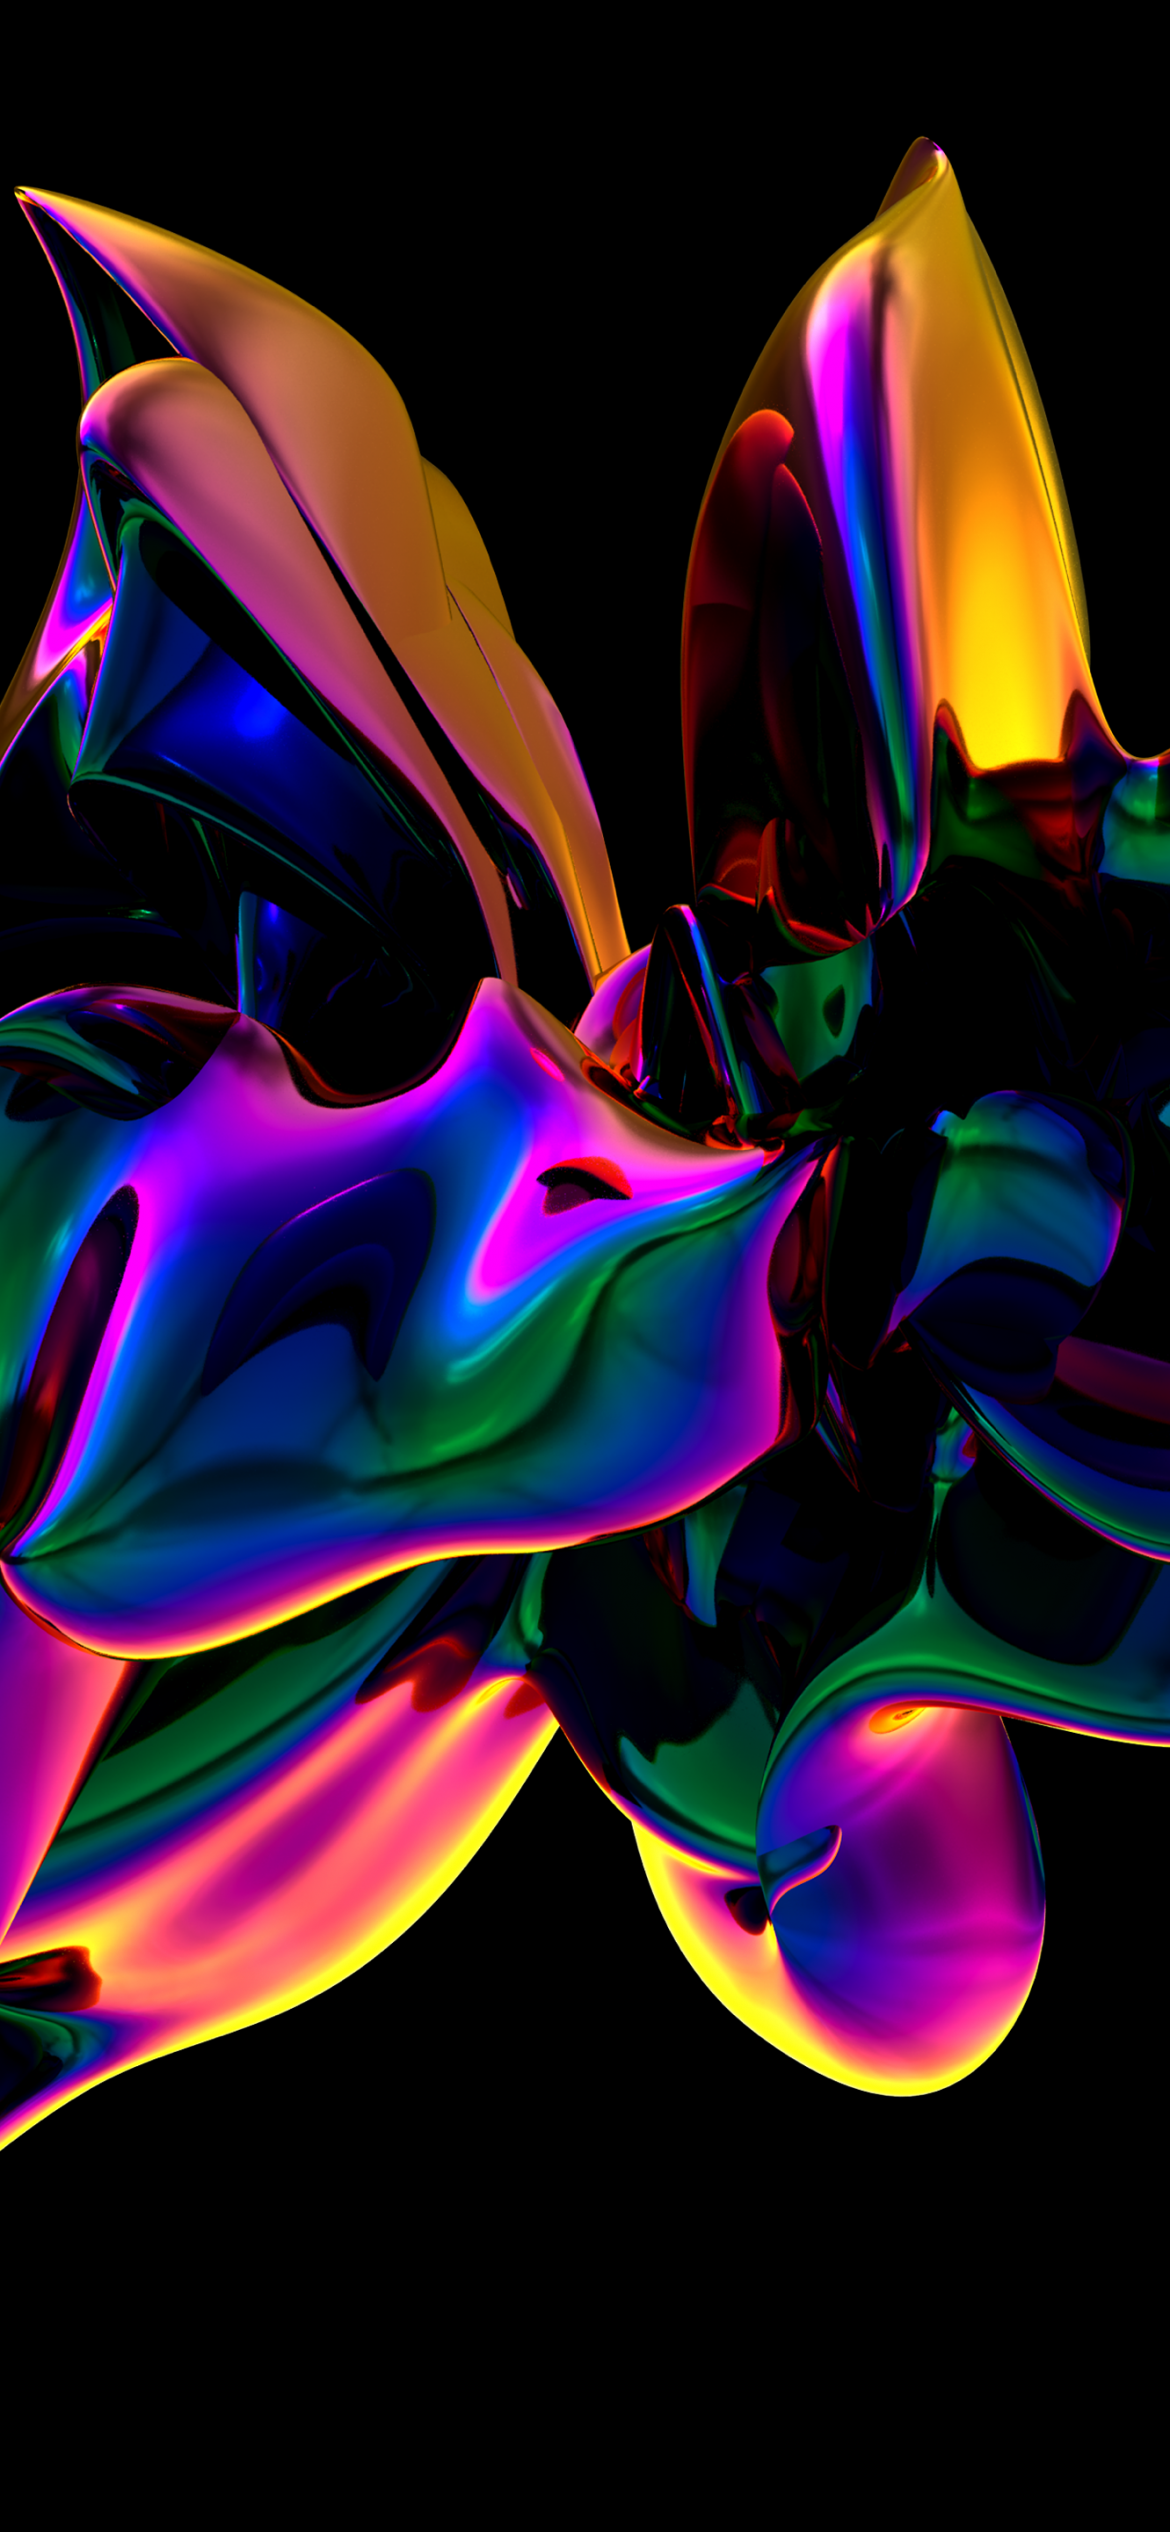 Shapes Wallpaper 4K, Black background, Abstract, #8176